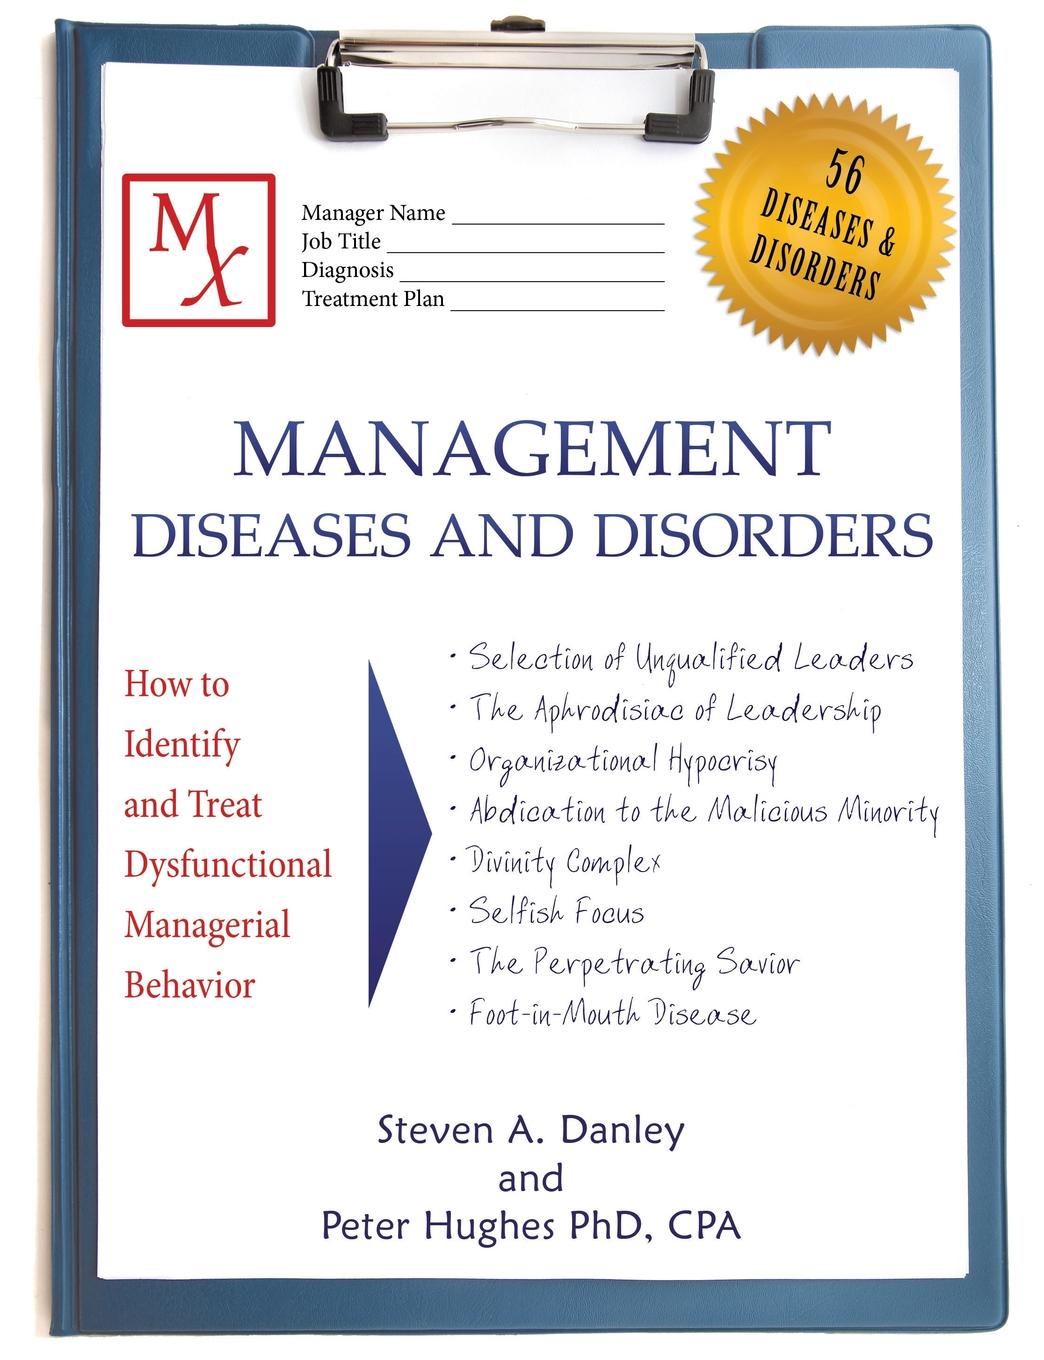 Management Diseases and Disorders. How to Identify and Treat Dysfunctional Managerial Behavior